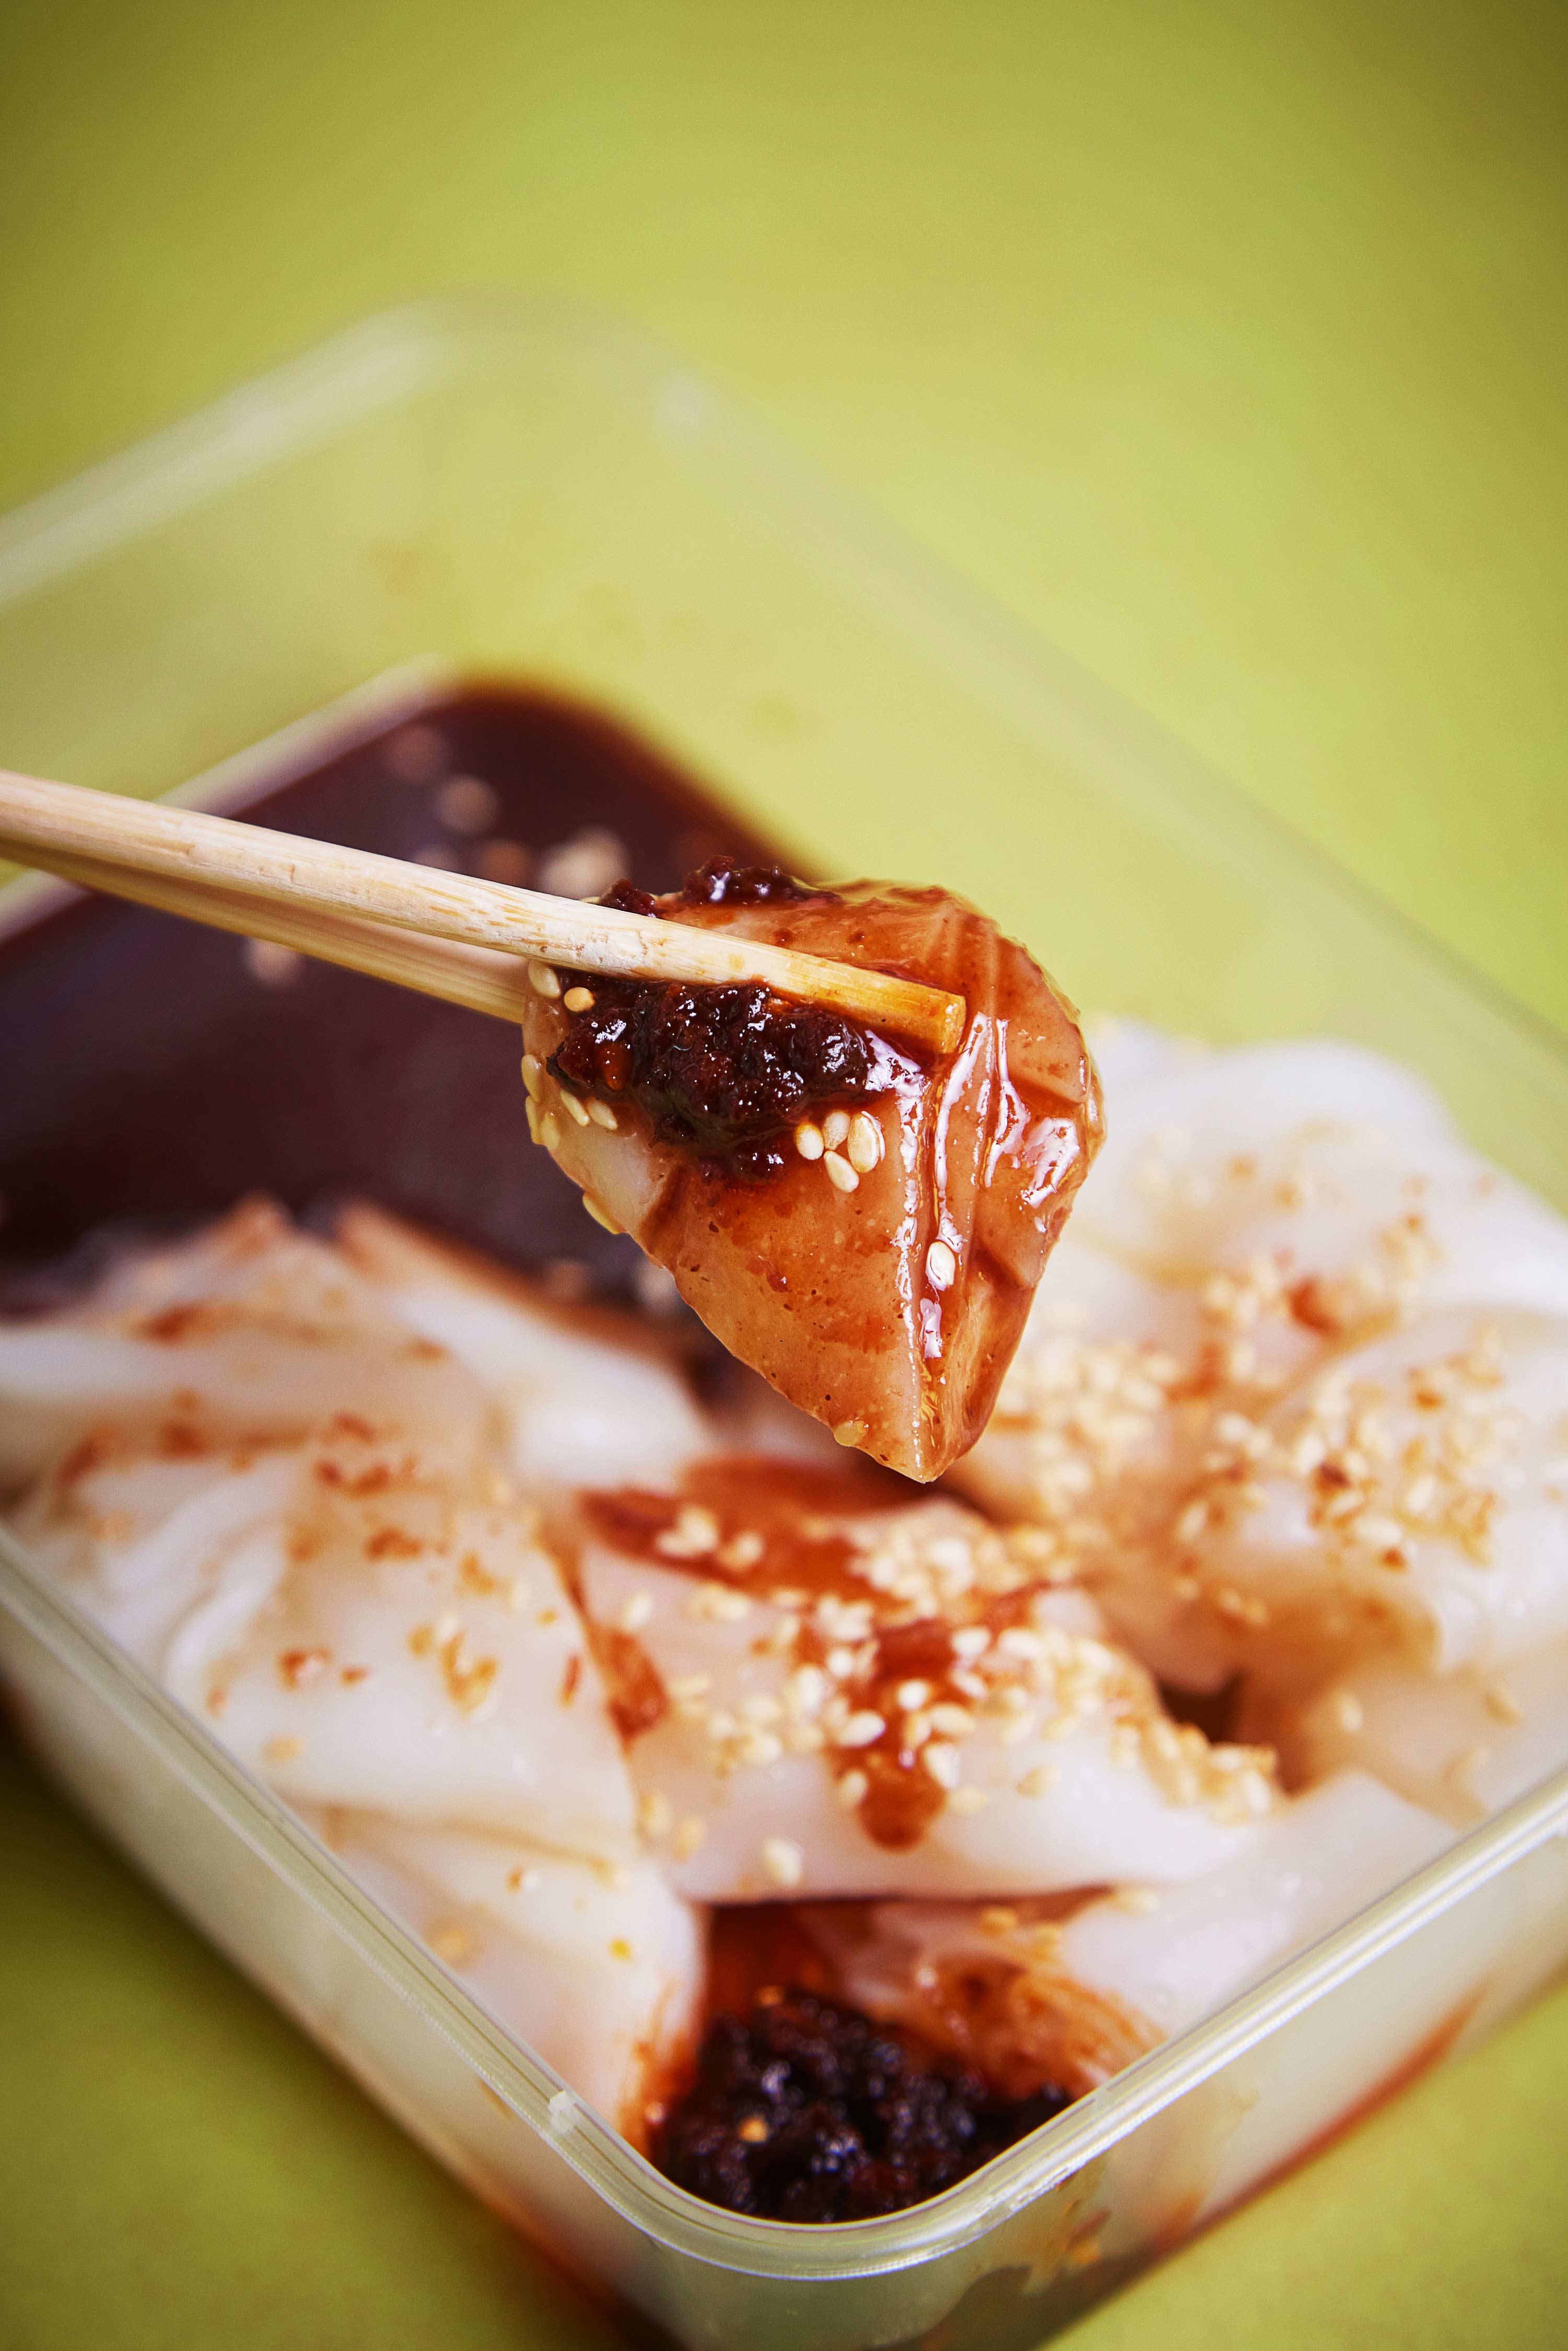 Chee Cheong Fun, $2.20 for two rolls; $3.30 for three (8 DAYS Pick!)